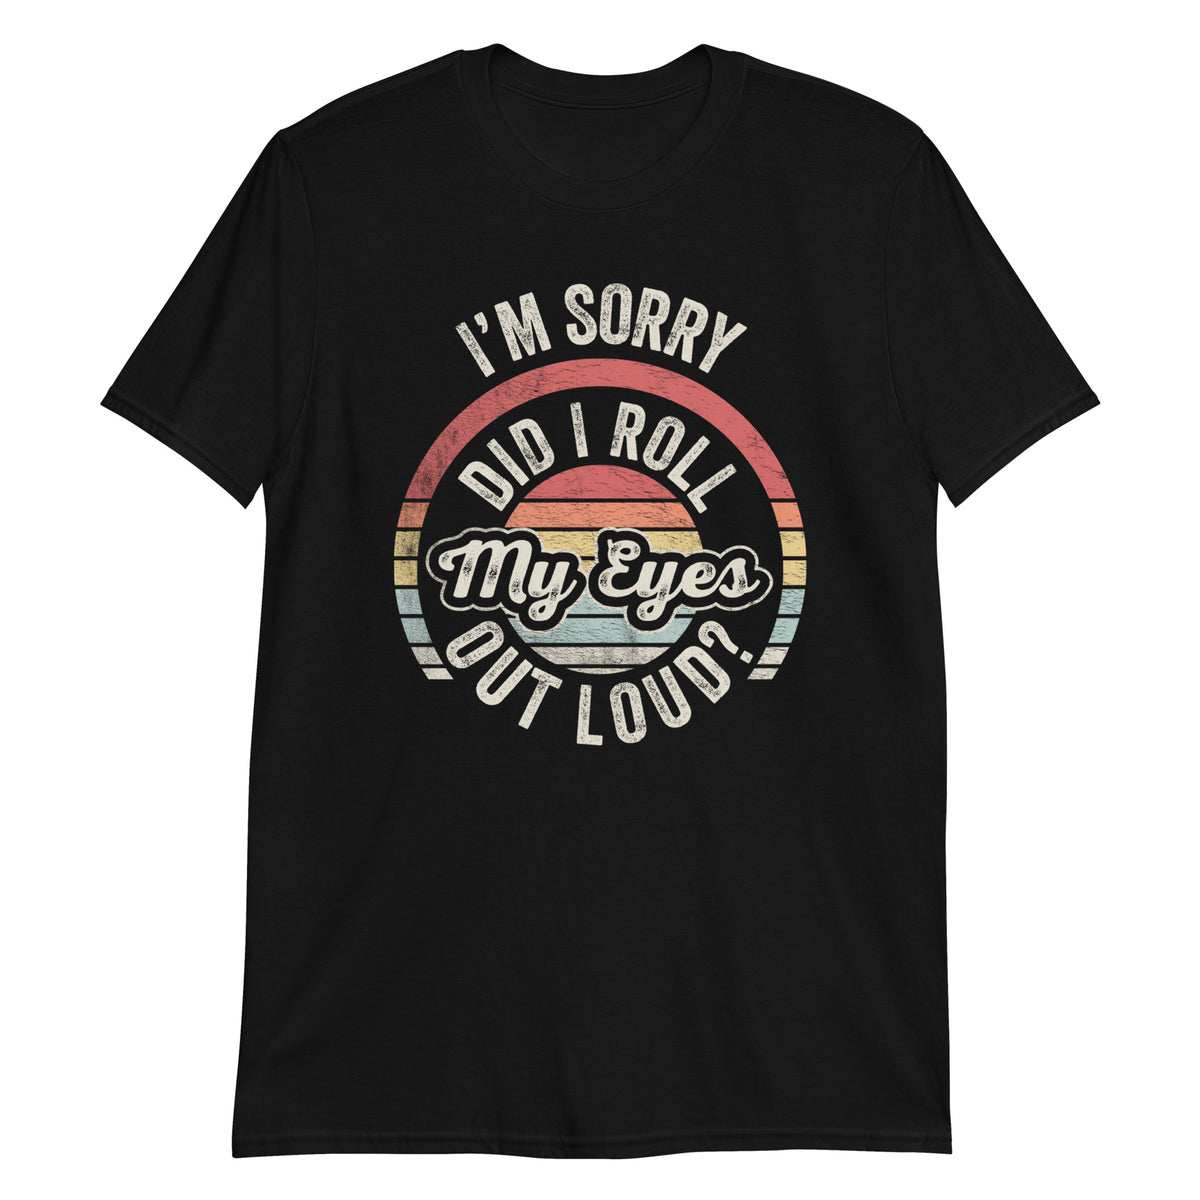 I'm Sorry Did I Roll My Eyes Out Loud? T-Shirt